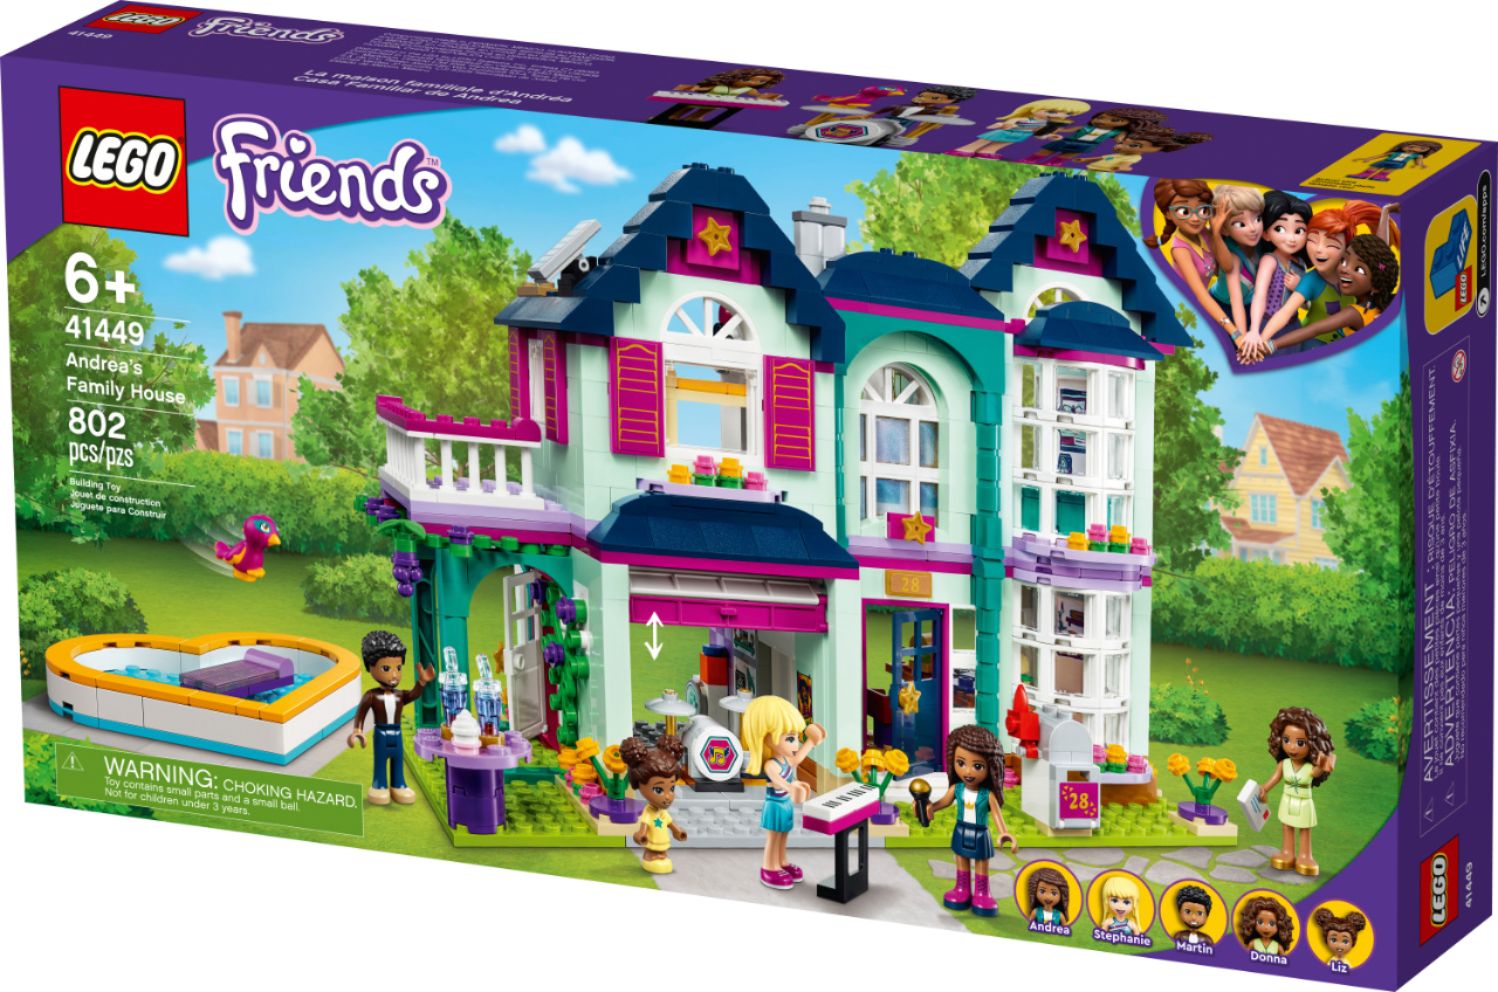 Angle View: LEGO - Friends Andrea's Family House 41449